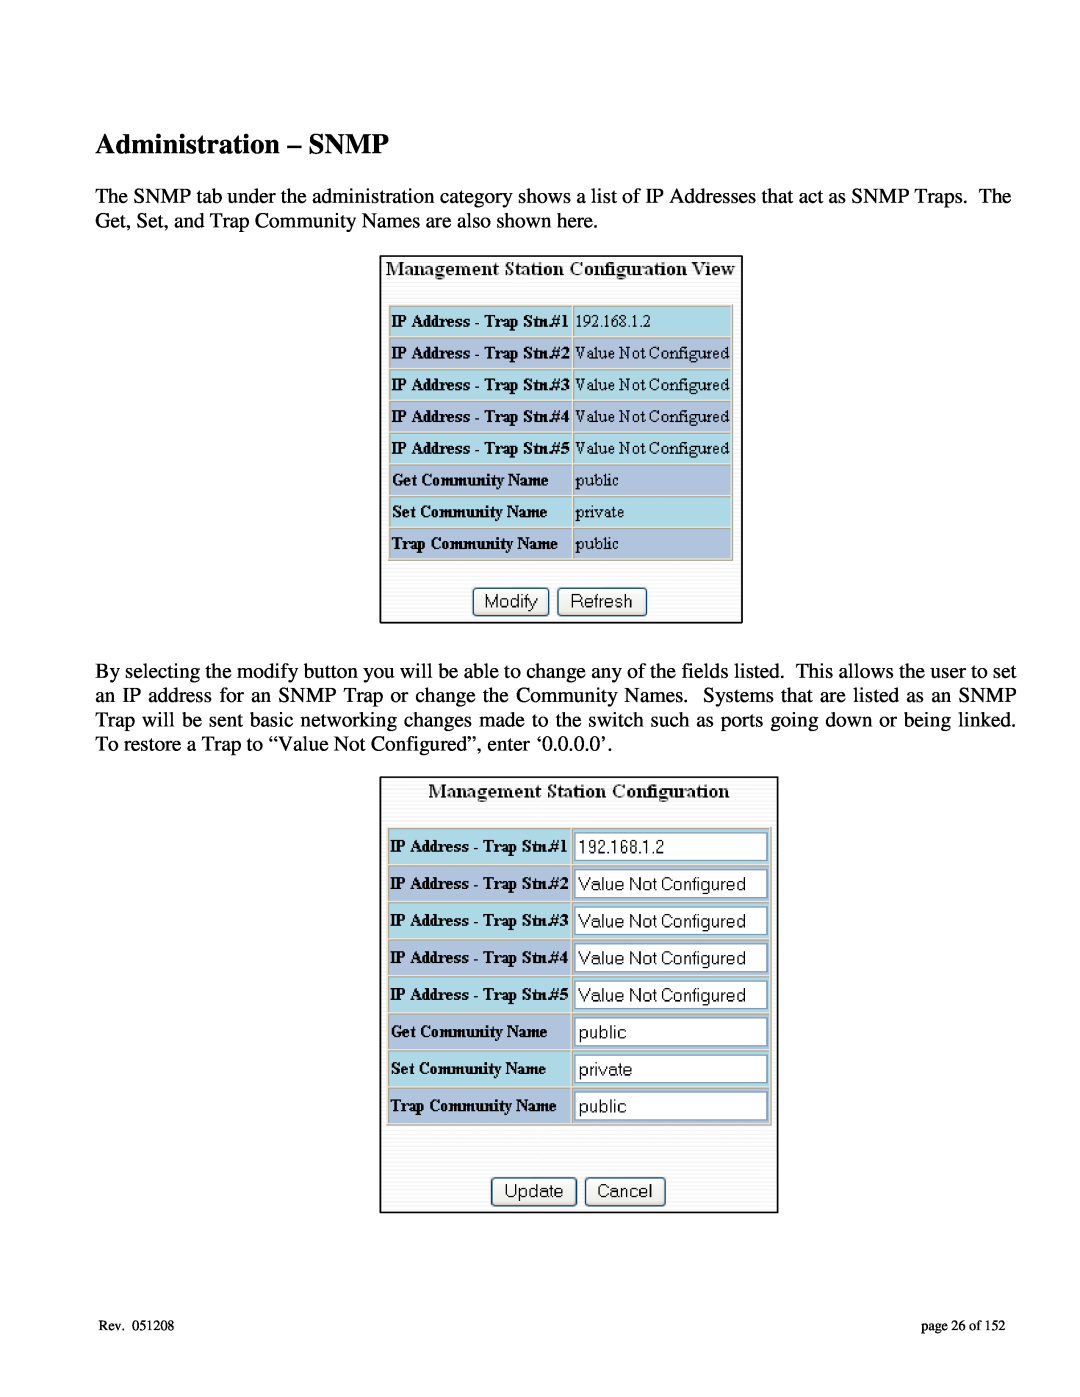 Gigabyte 7014 user manual Administration - SNMP, page 26 of 